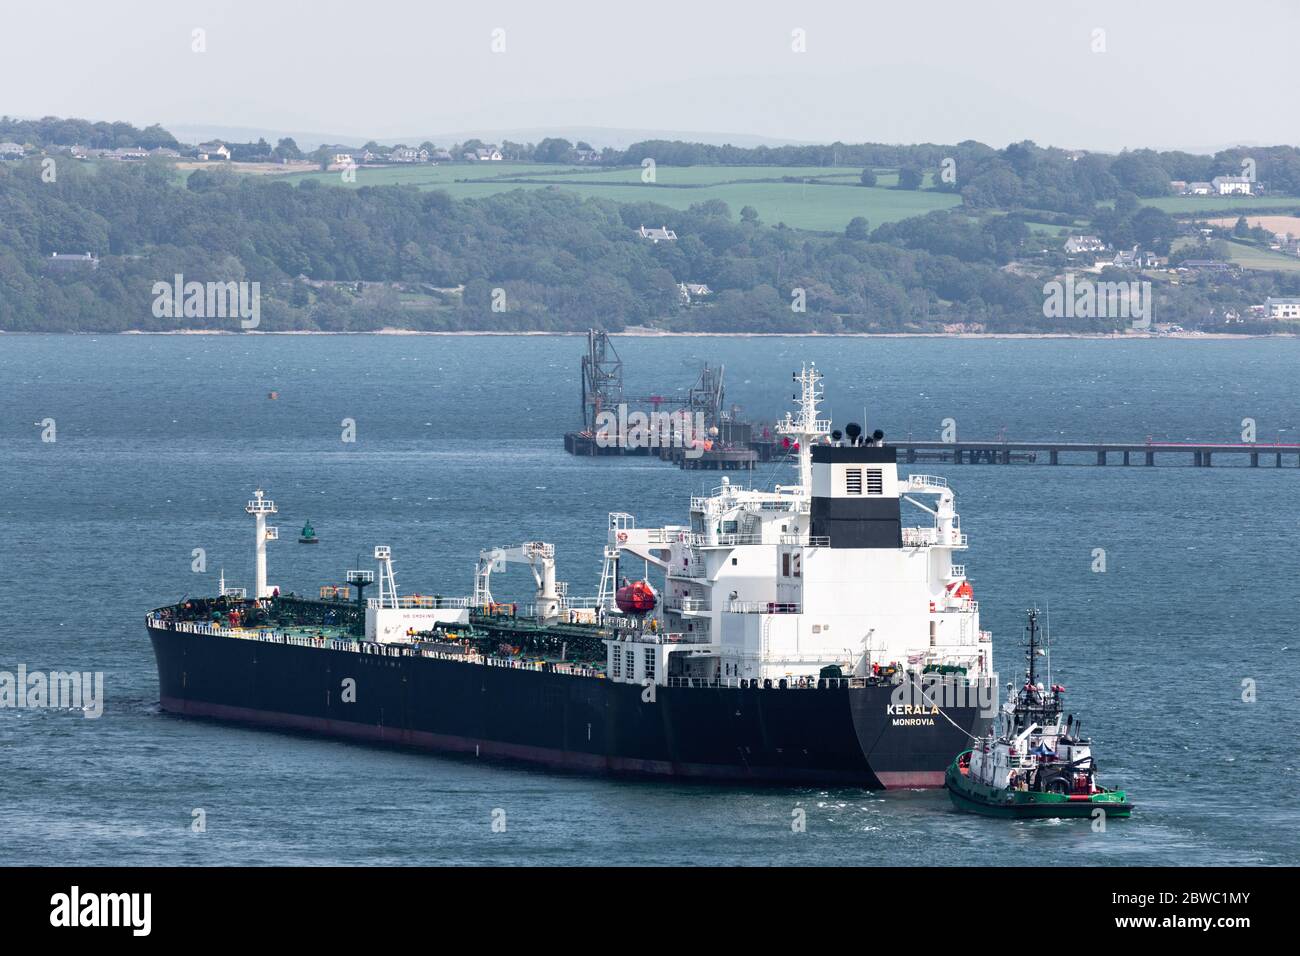 Cork Harbour, Cork, Ireland. 31st May, 2020. Oil tanker Kerala with a cargo of crude oil from Nigeria is escorted by tugboat DSG Titan as she approaches the jetty at the Whitegate oil Refinery in Cork Harbour, Ireland. Since the outbreak of the Covid-19 pandemic demand for oil has slumped on international markets which has resulted in a shortage of storage capacity worlwide. - Credit; David Creedon / Alamy Live News Stock Photo